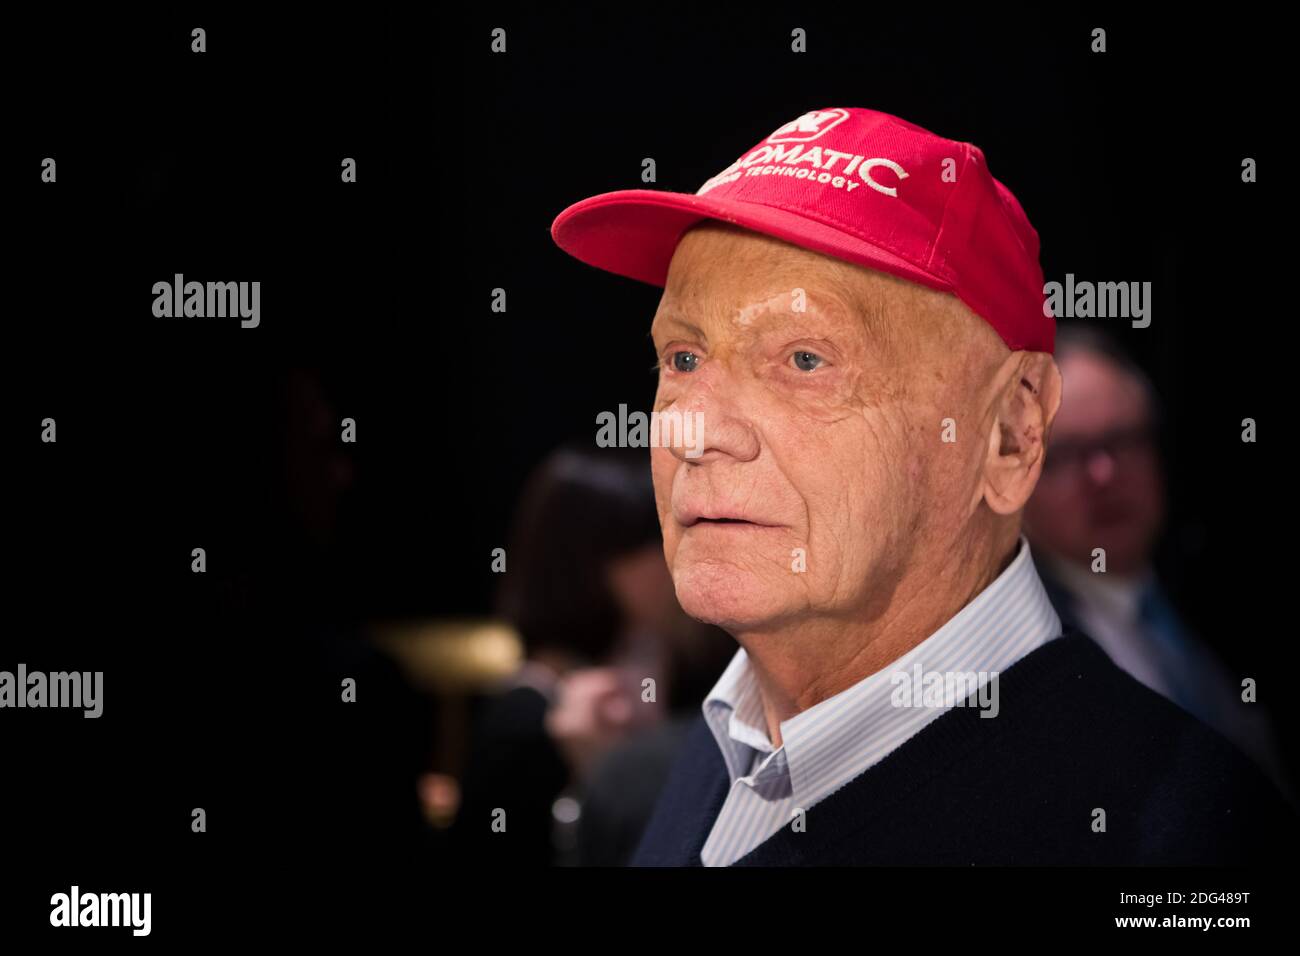 Page 9 - Niki Lauda High Resolution Stock Photography and Images - Alamy